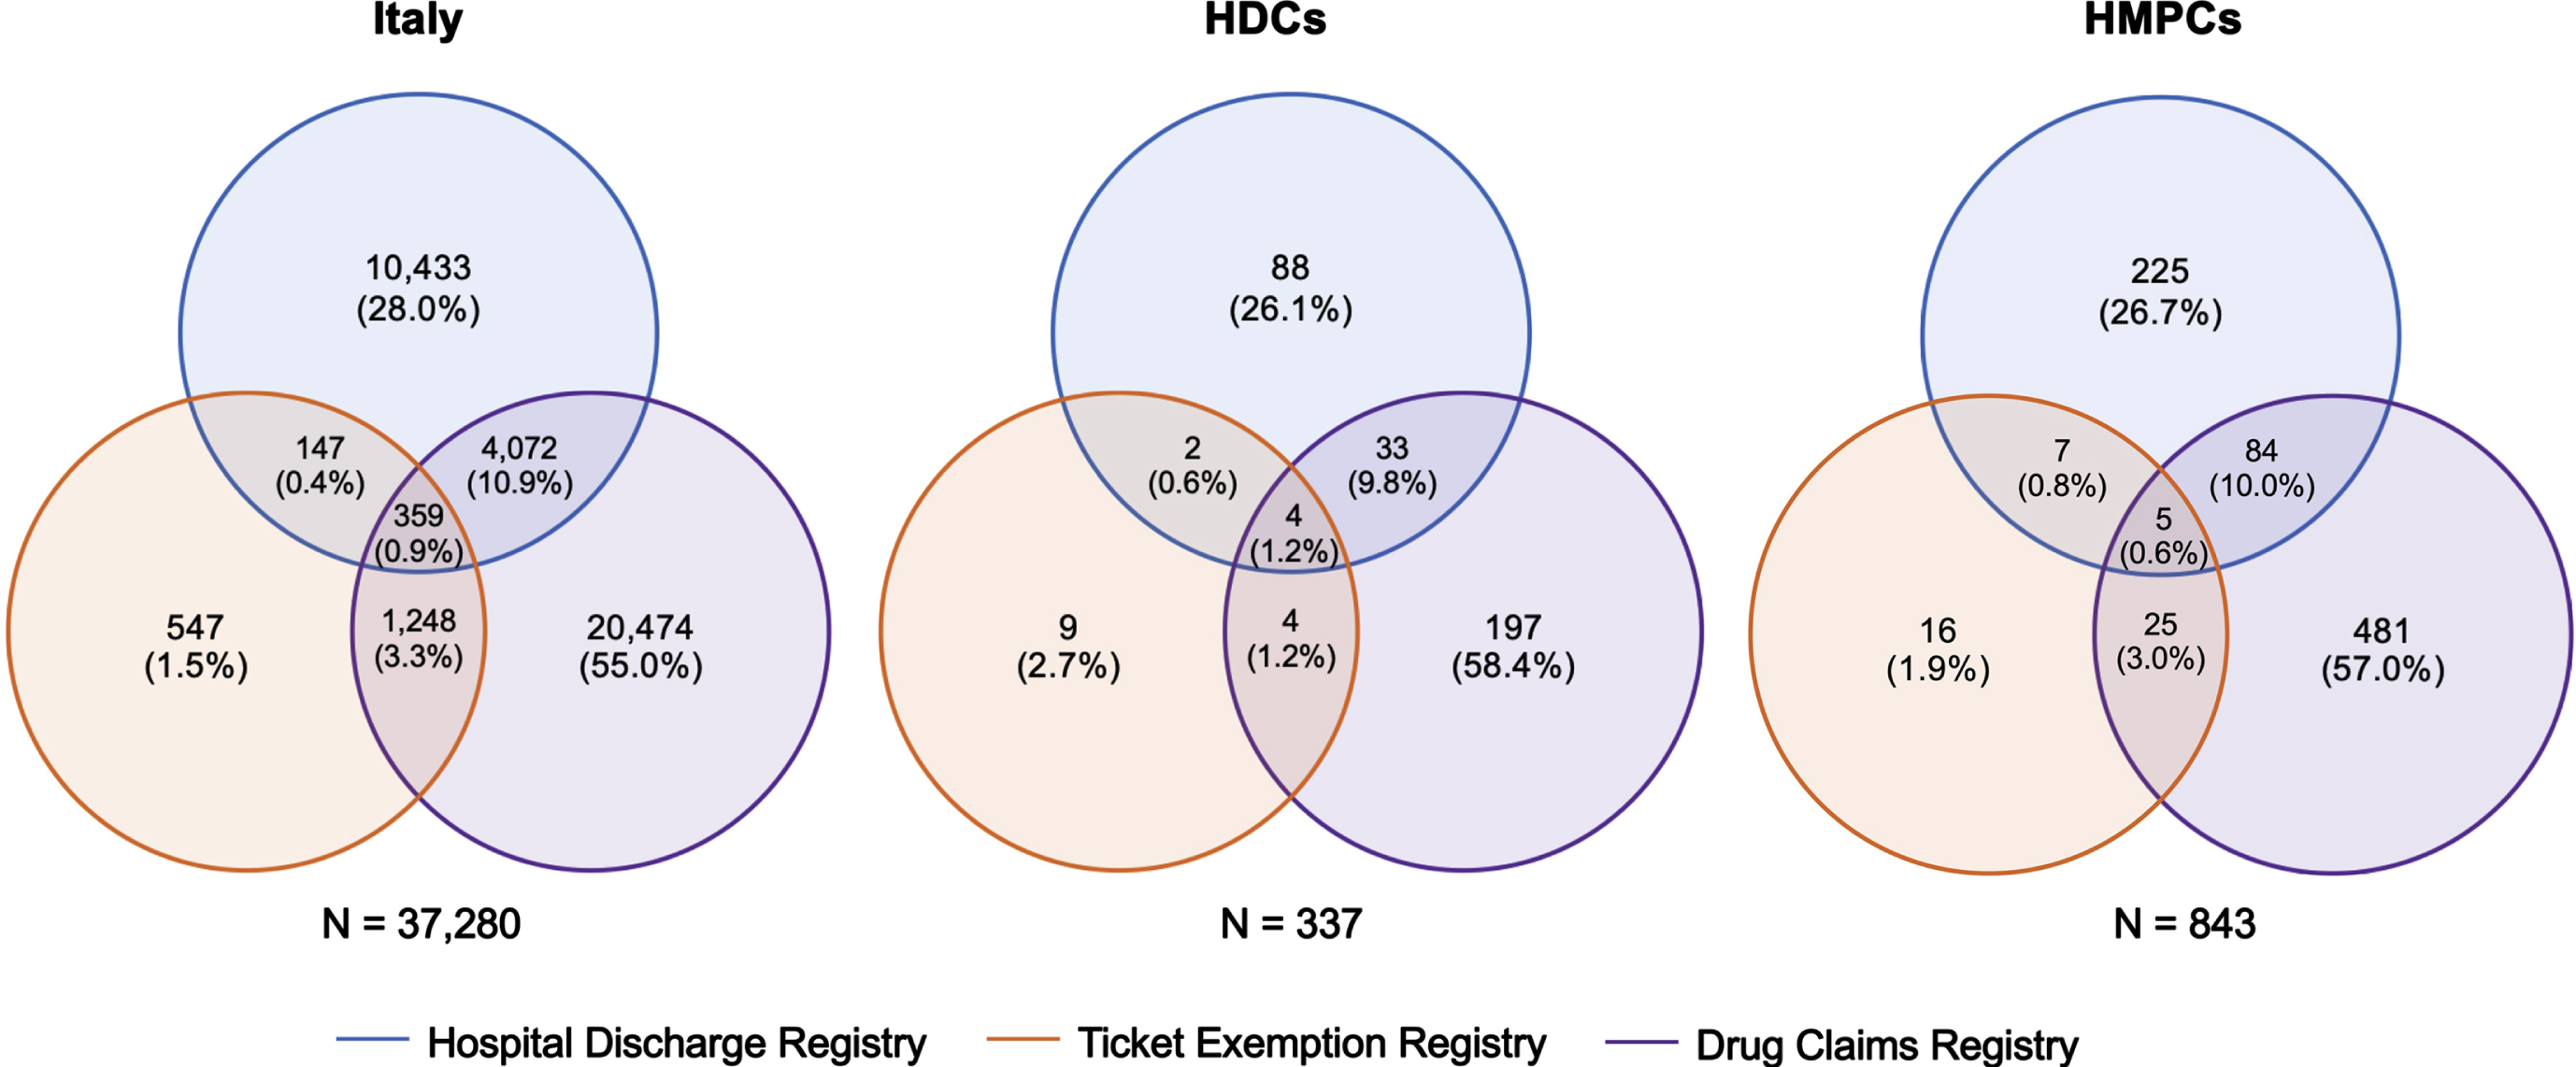 Venn diagrams showing the number of dementia cases identified in each of the three healthcare and administrative datasets by migrant status and the intersects of these three data sources. HDCs, highly developed countries; HMPCs, high migratory pressurecountries.